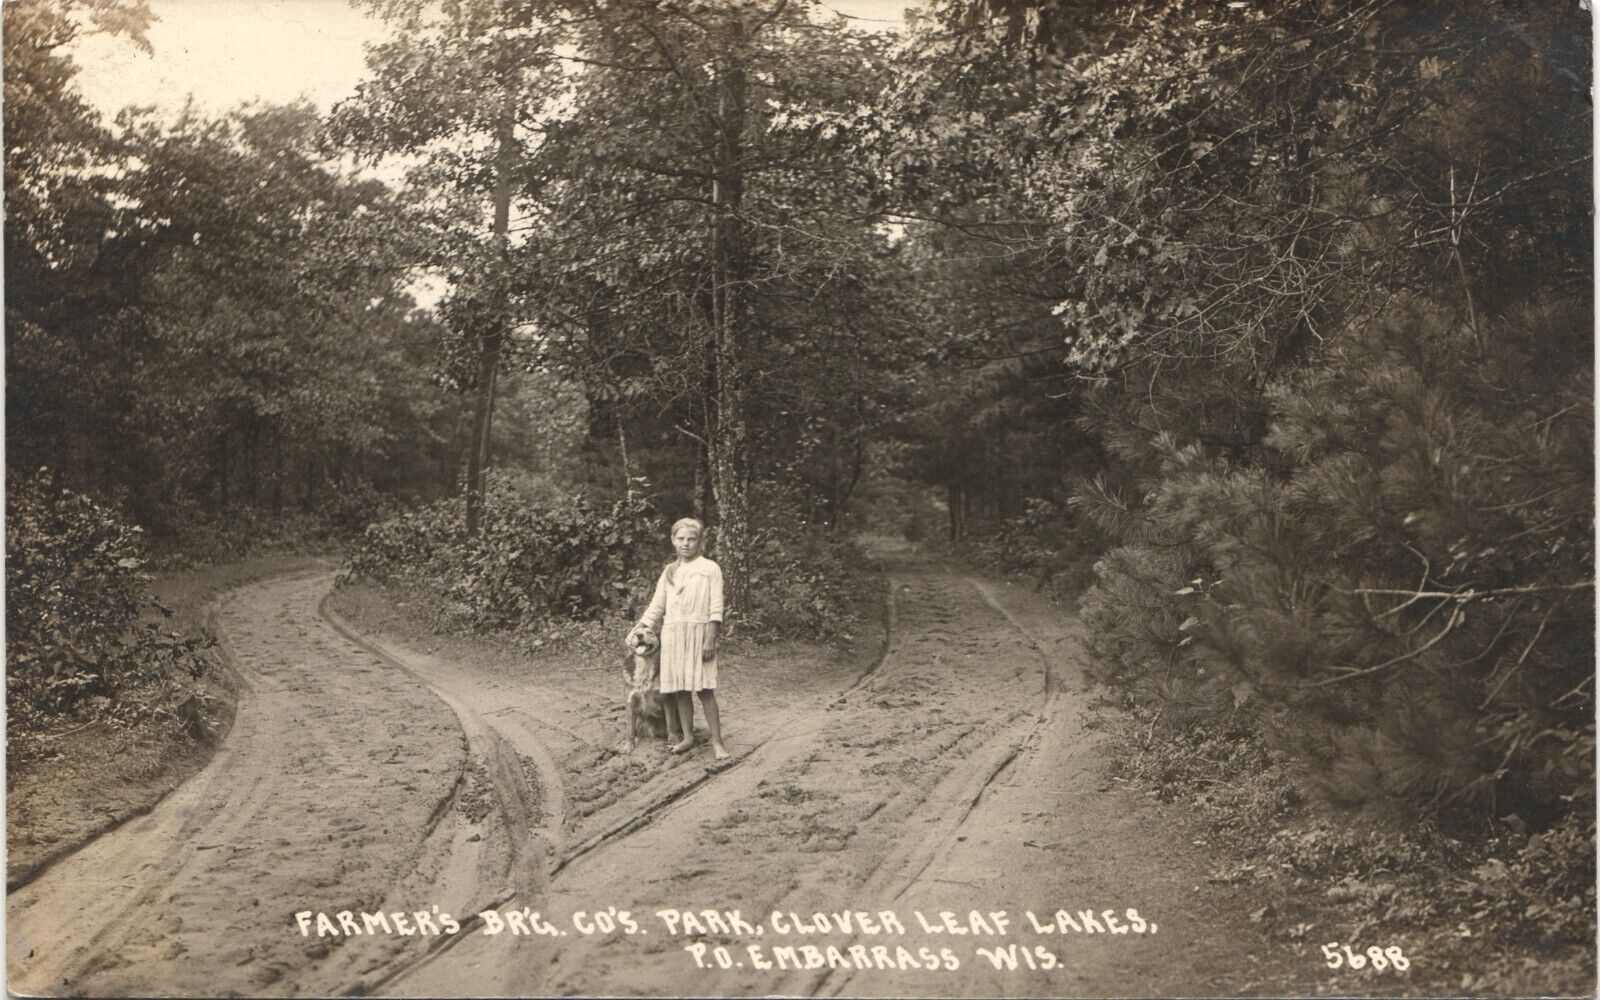 CLOVER LEAF LAKES PARK original real photo postcard rppc EMBARRASS WISCONSIN WI